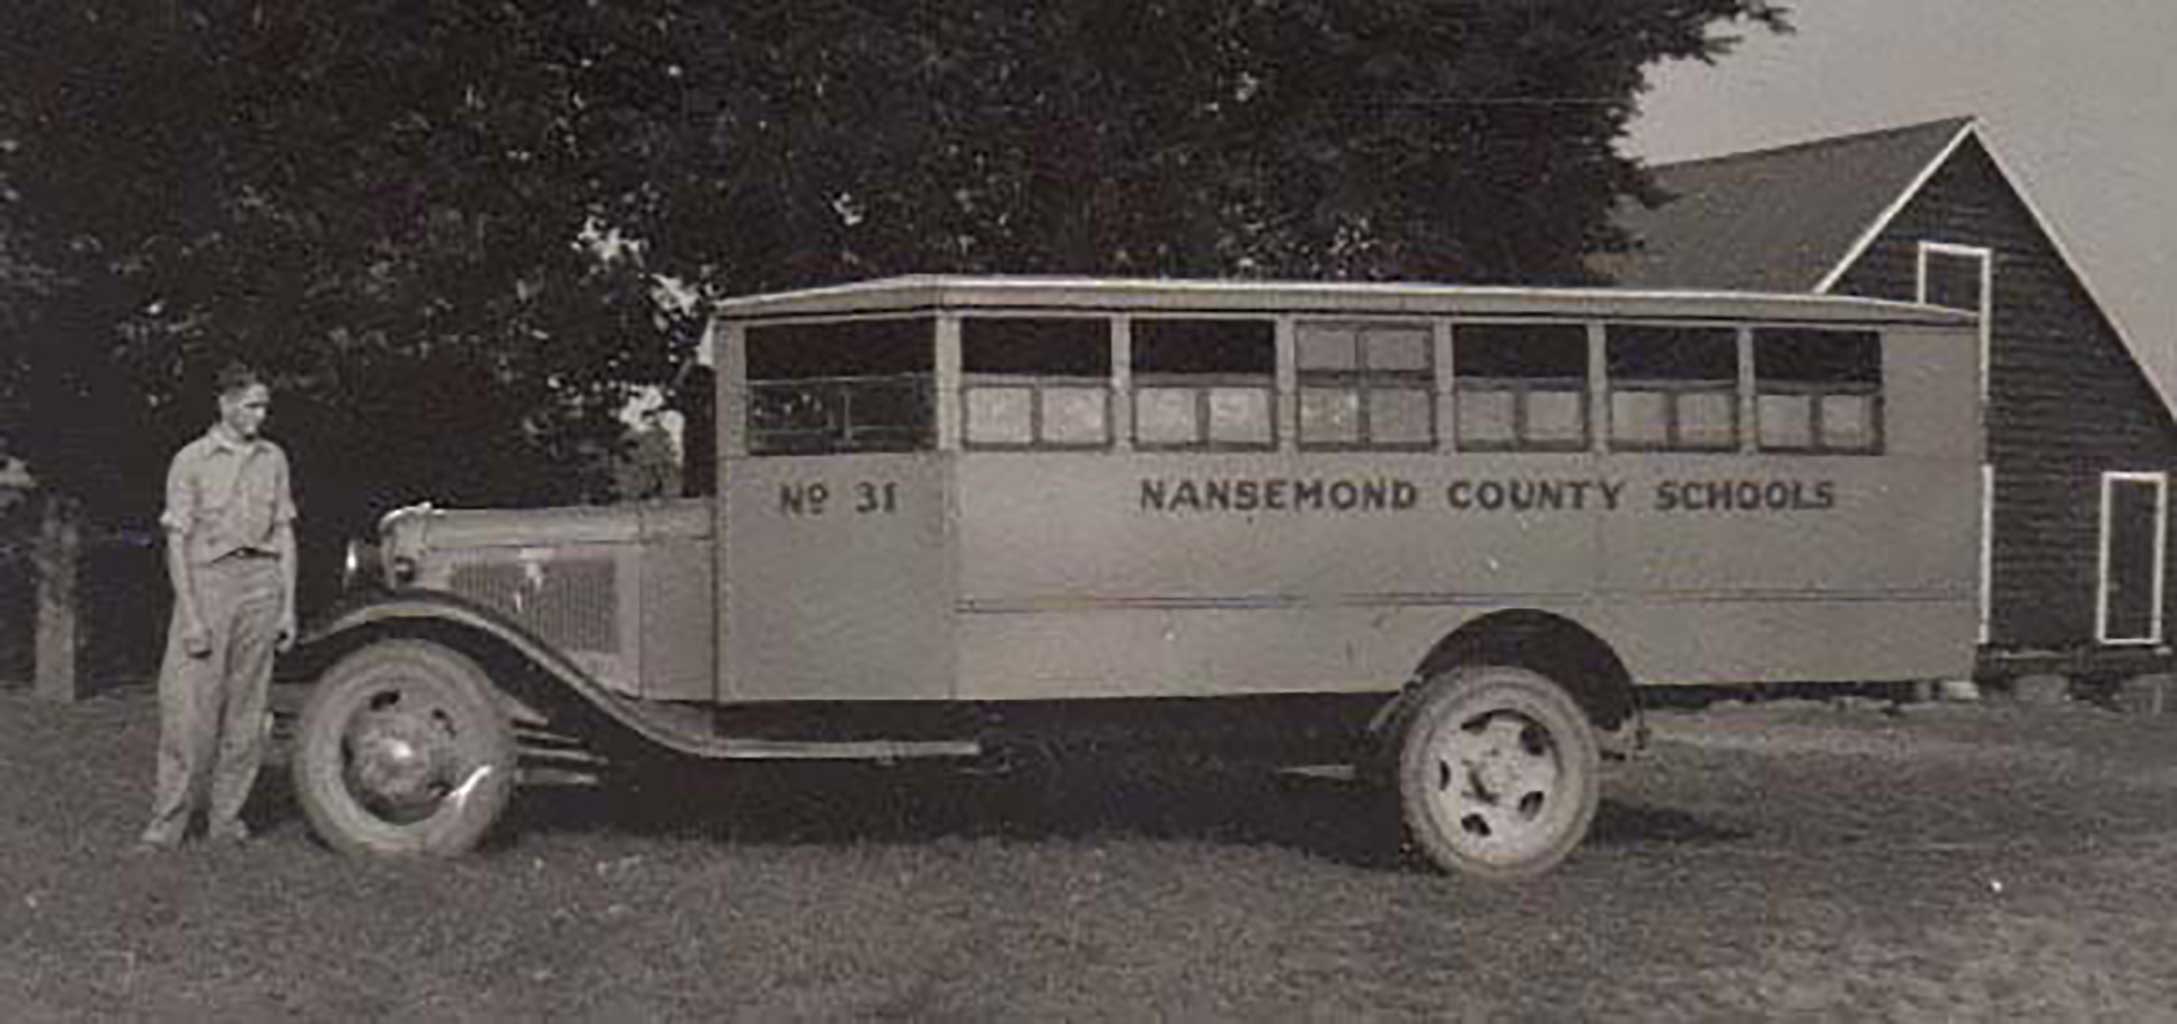 nathaniel-t-gray-1943-44-bus-route-everets-road-to-sandy-bottom-christina-gray-photo